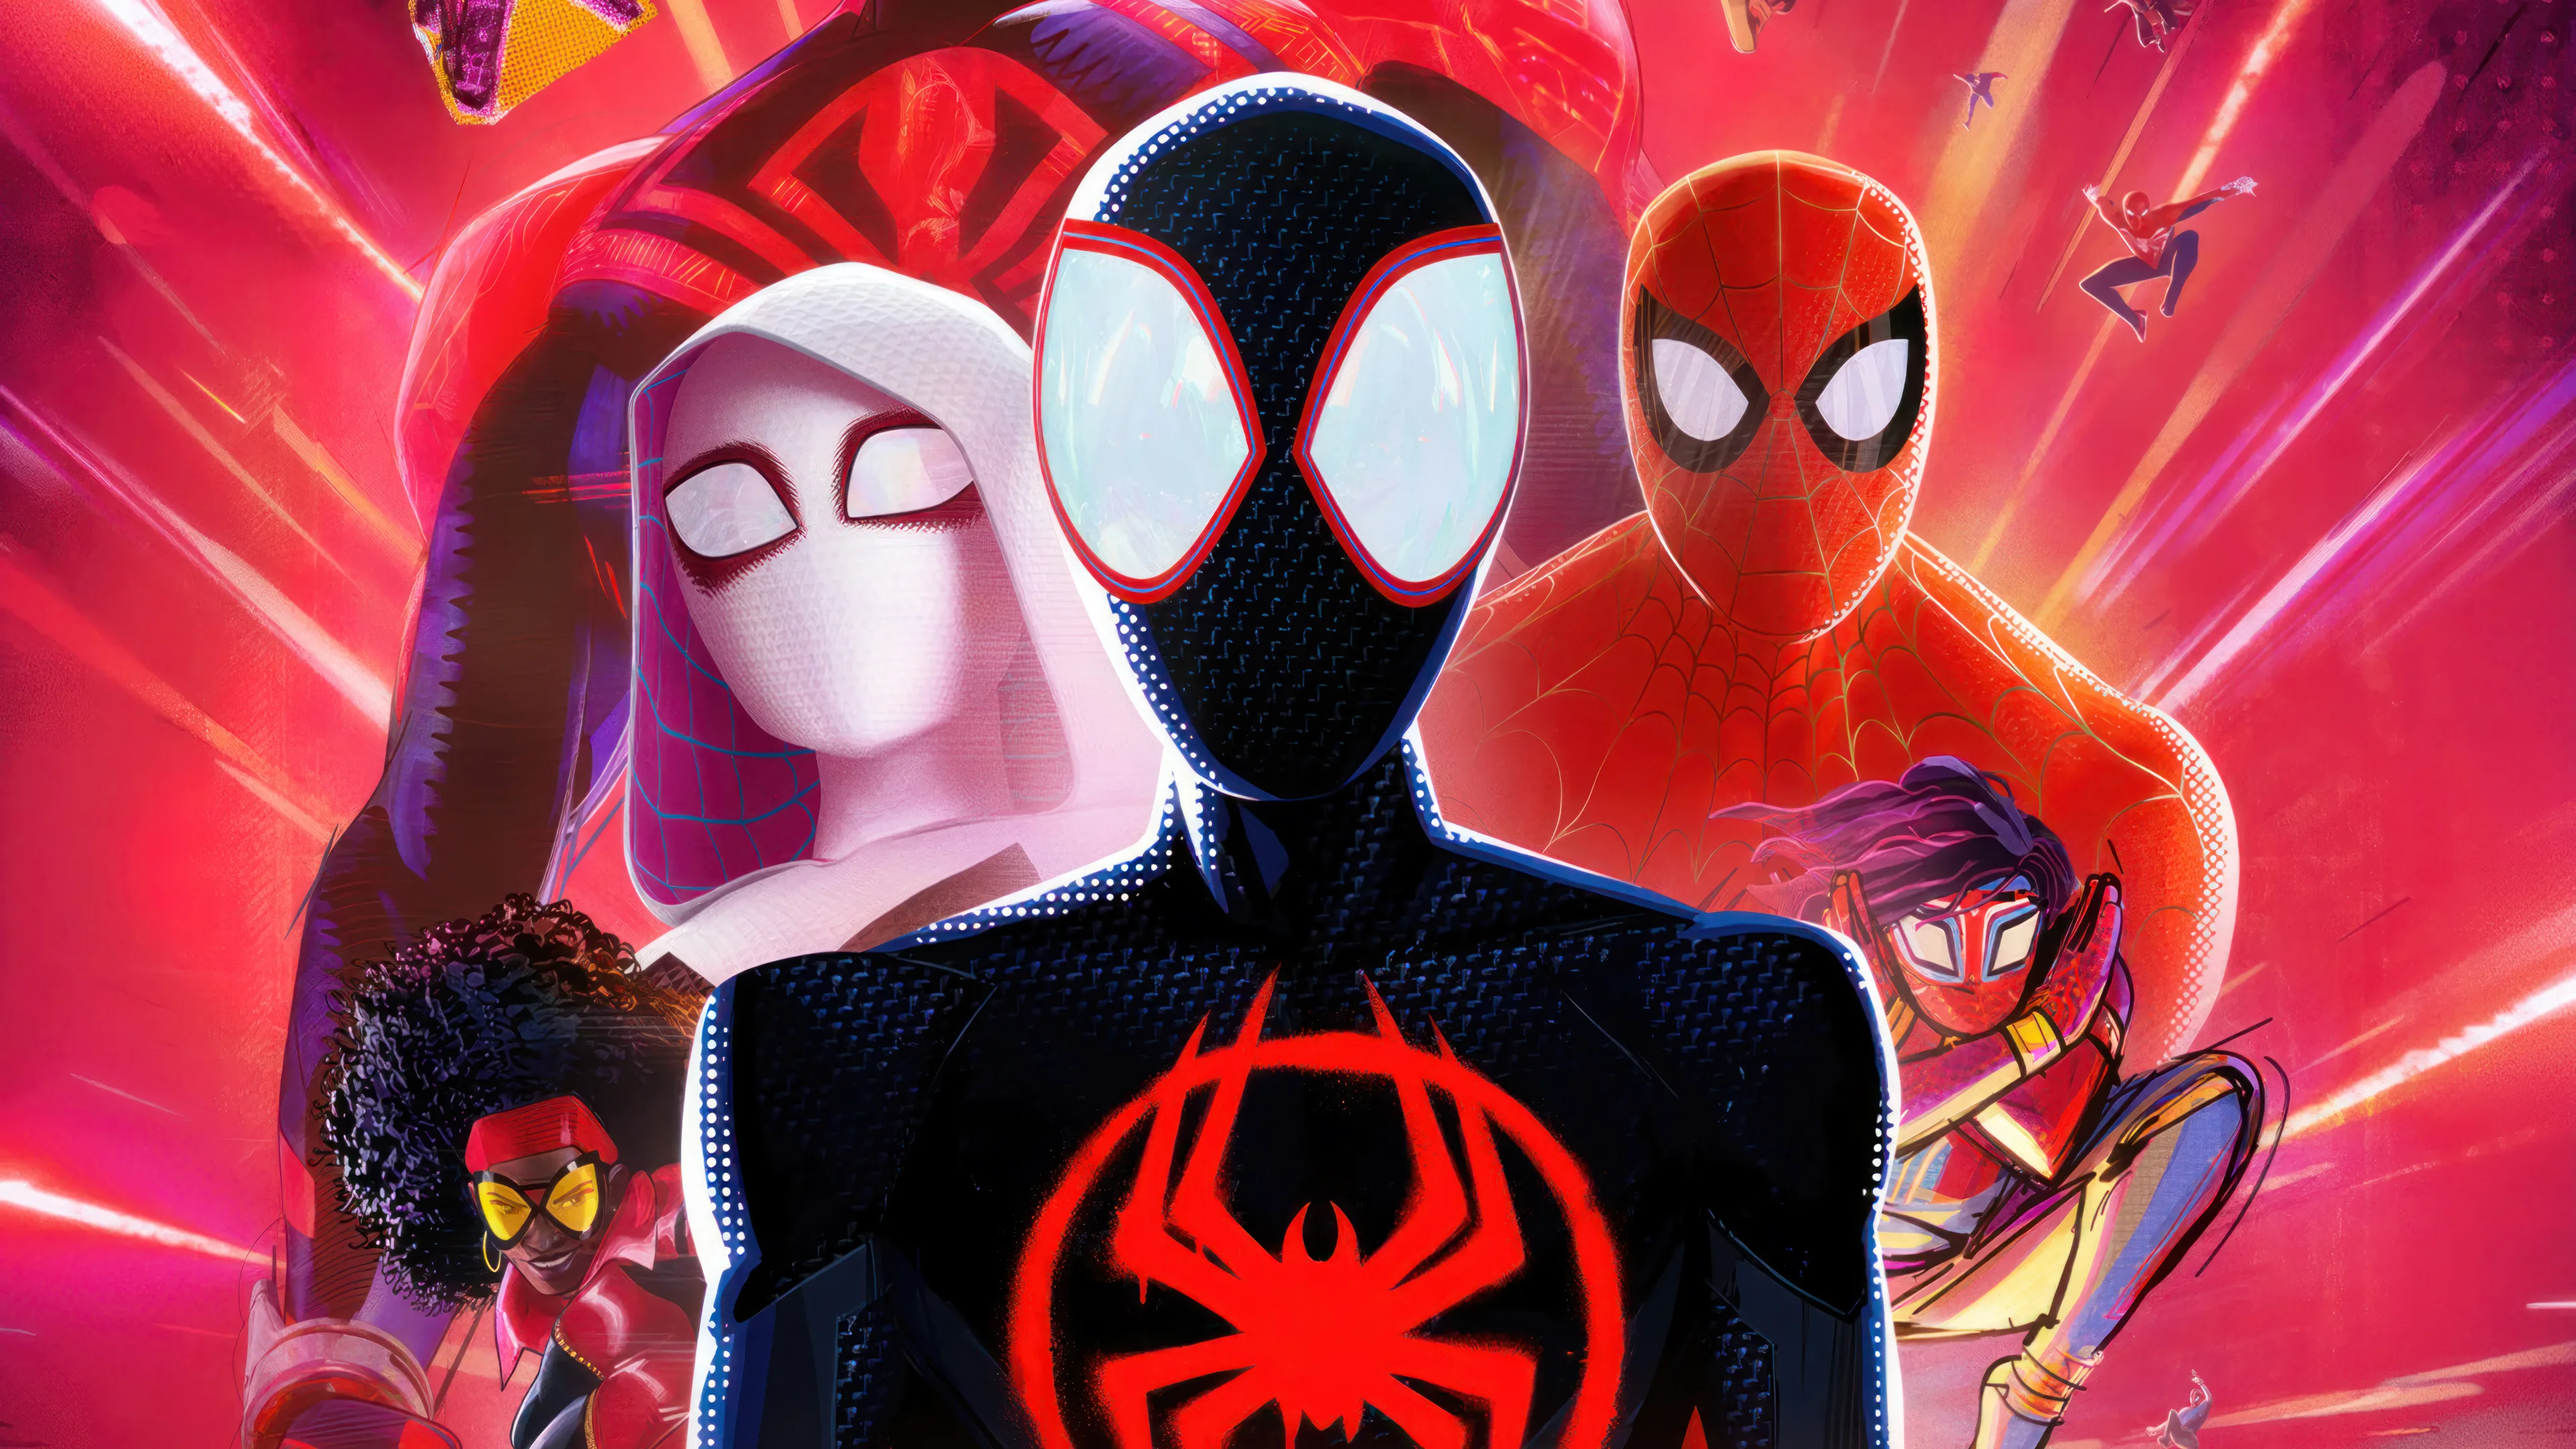 Spider-Man: Across the Spider-Verse Characters 4K Wallpaper - Pixground -  Download High-Quality 4K Wallpapers For Free